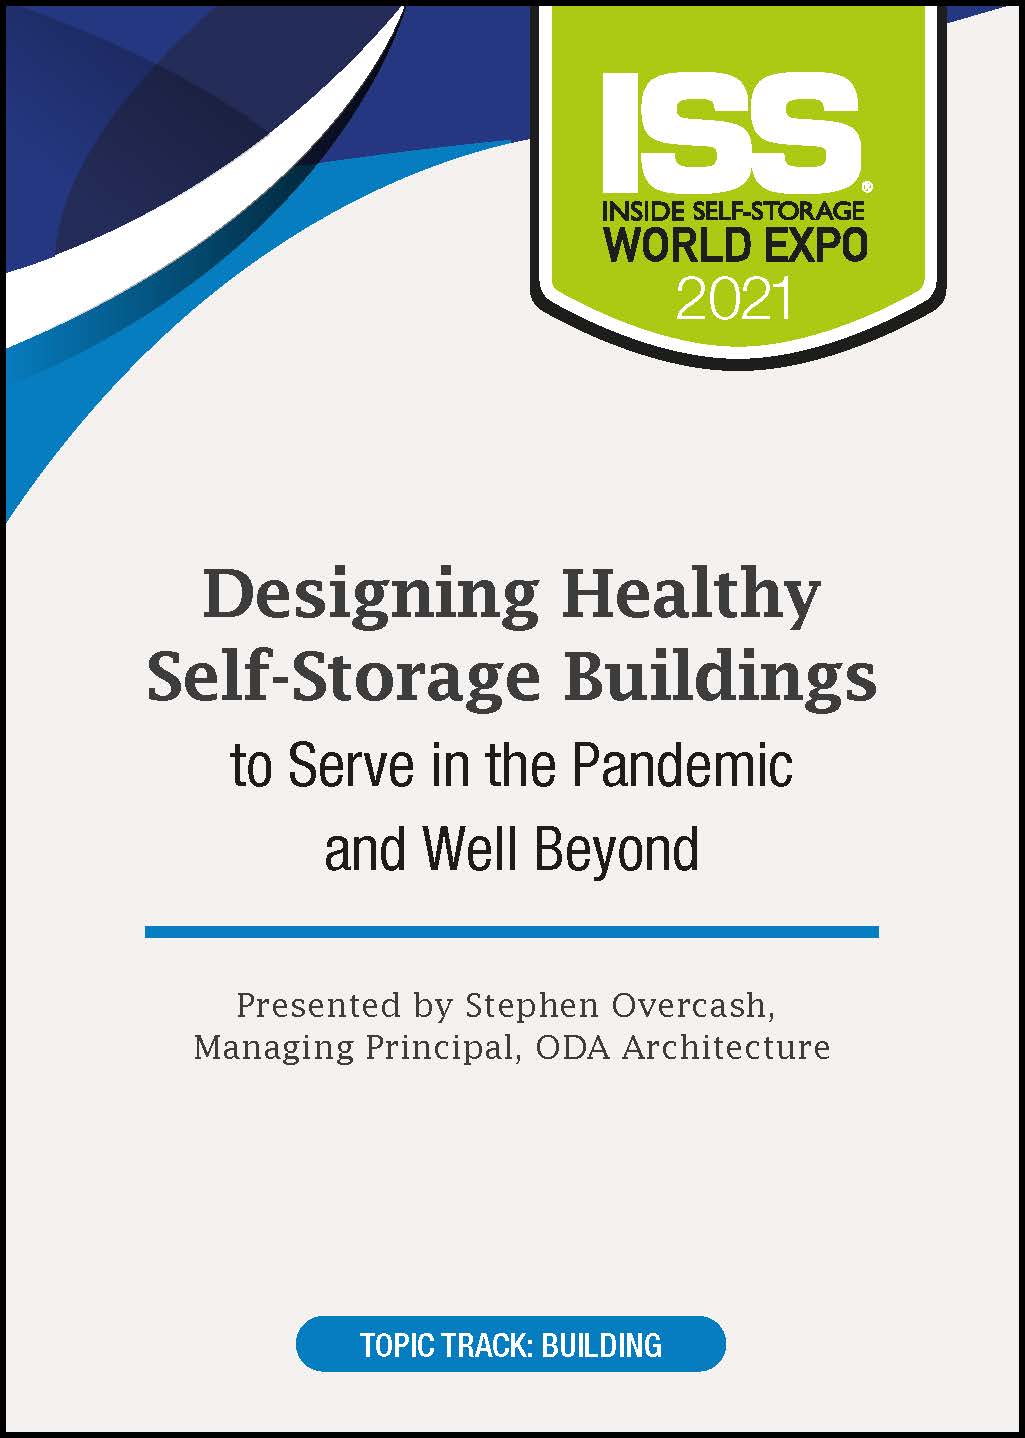 DVD - Designing Healthy Self-Storage Buildings to Serve in the Pandemic and Well Beyond